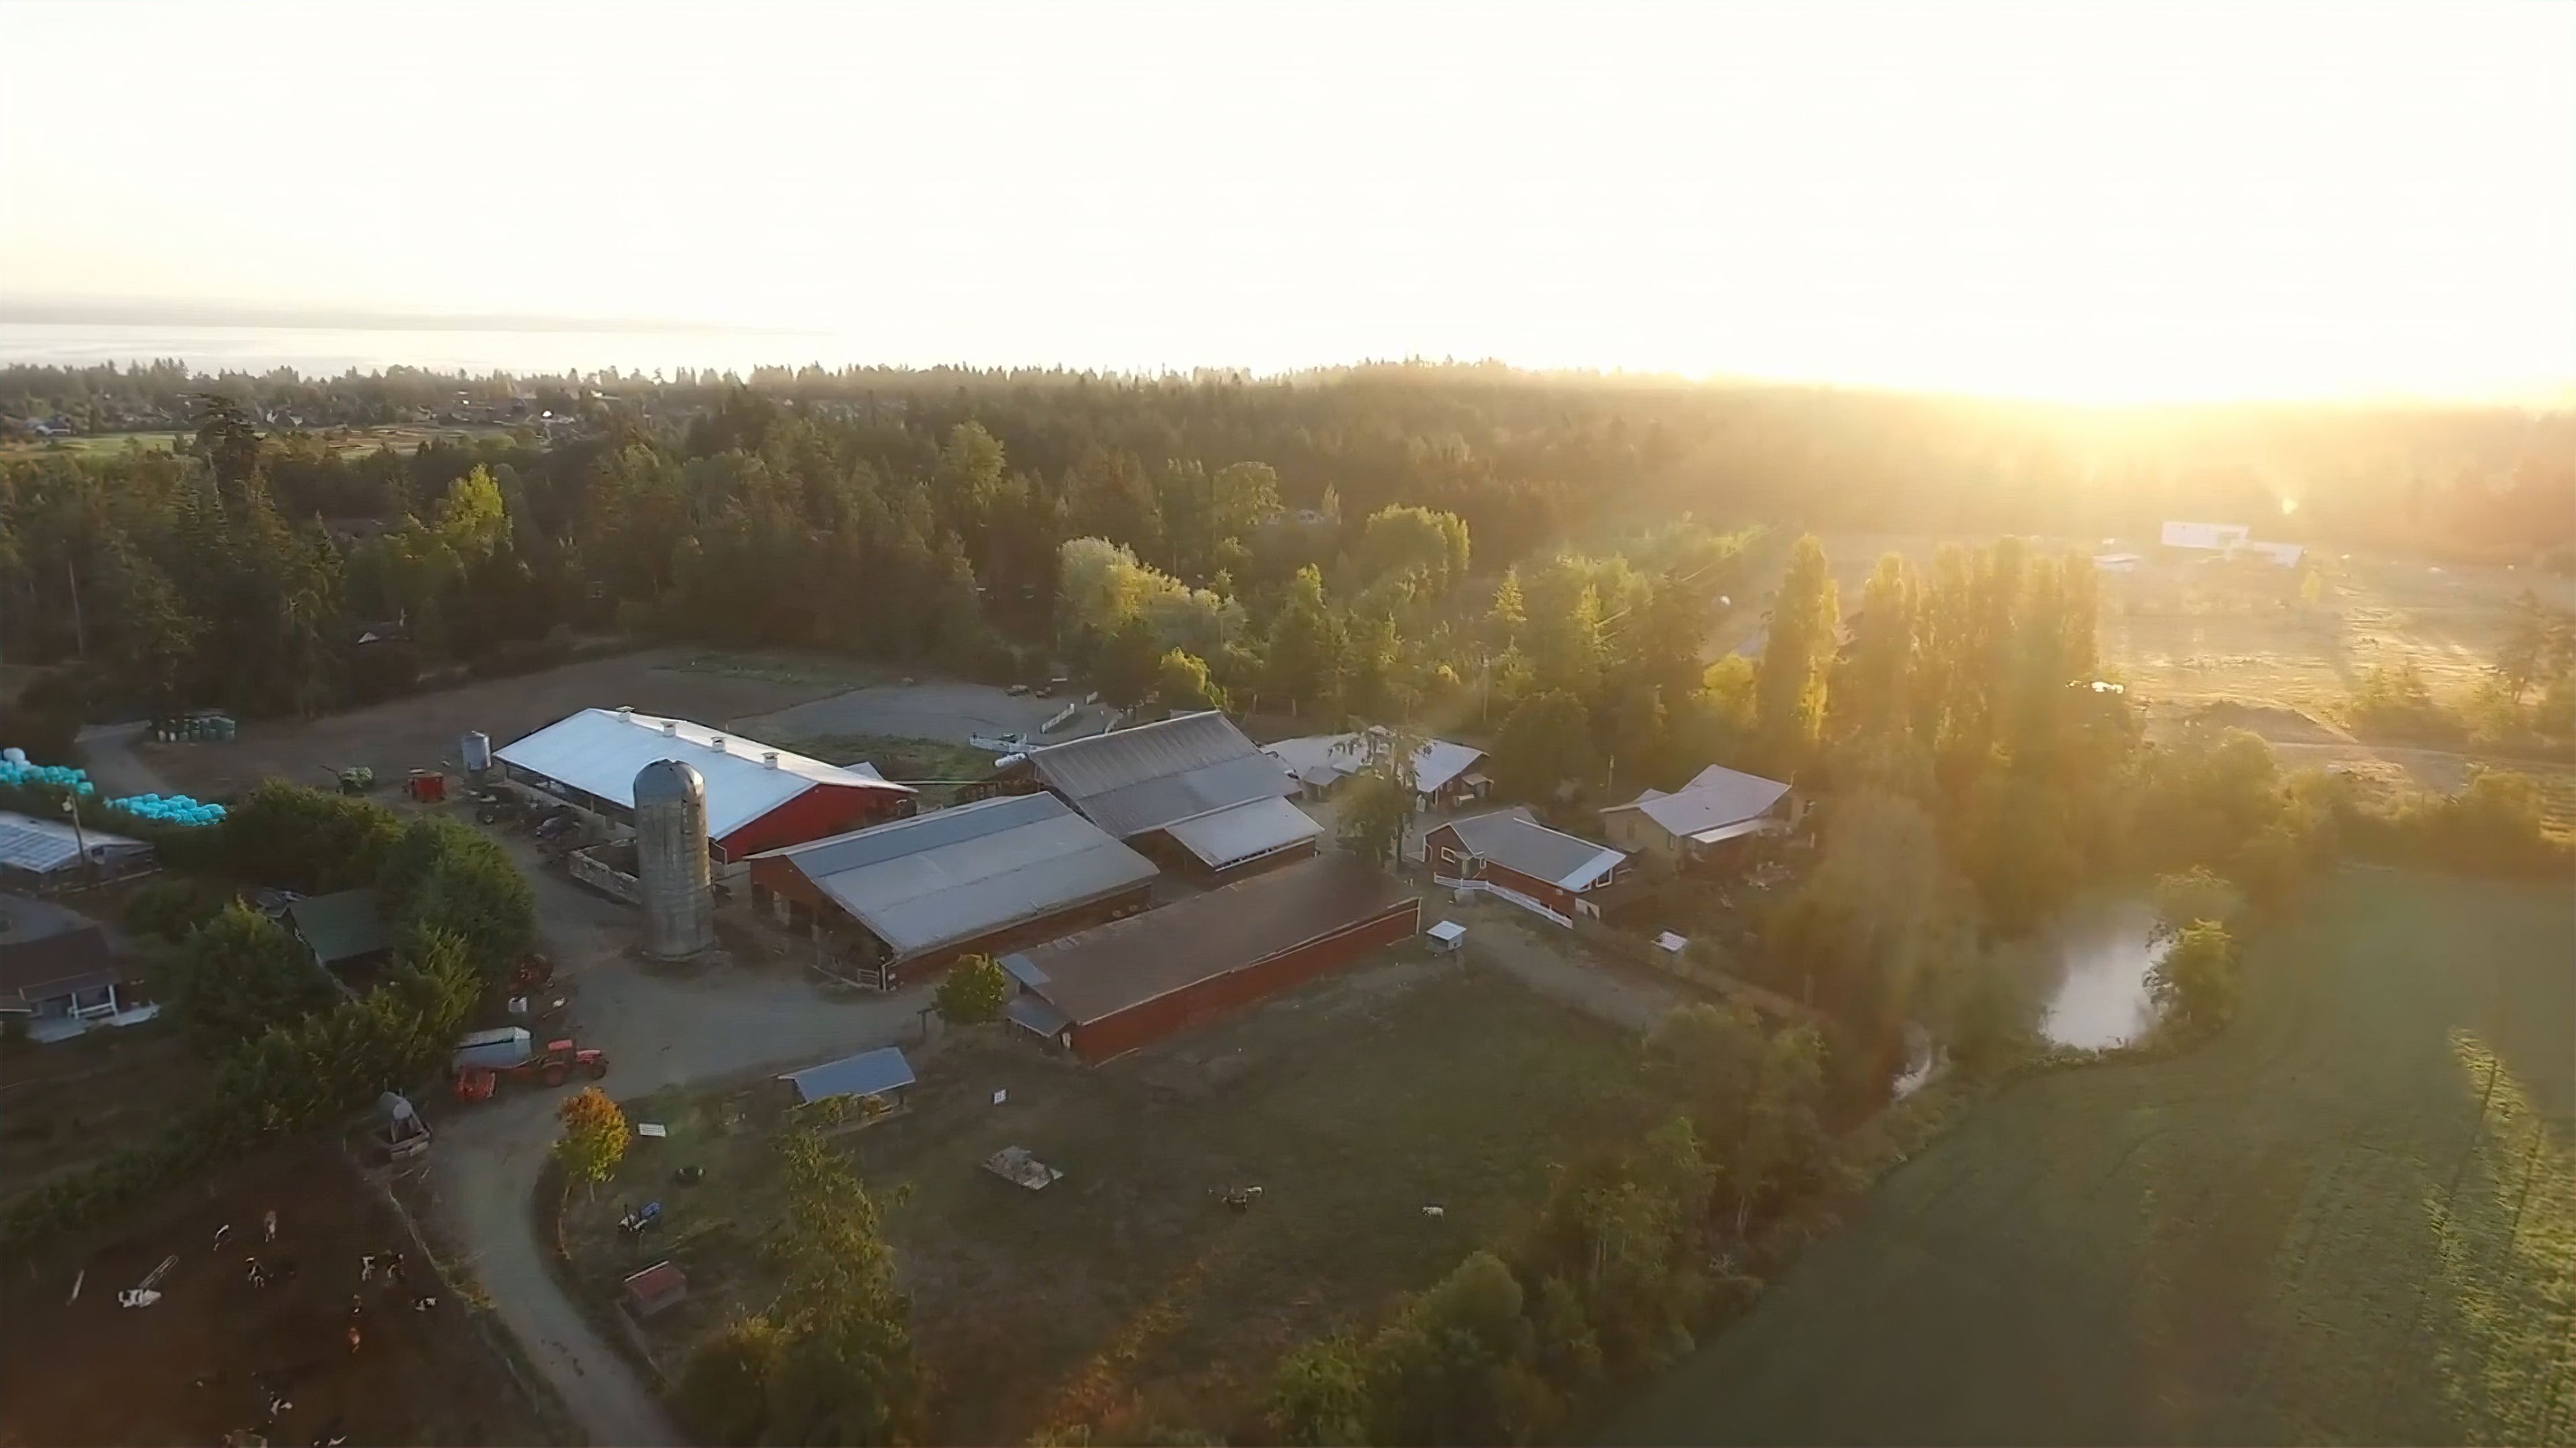 Drone image of barns and farm fields. The image faces east towards the ocean where the sun is rising.